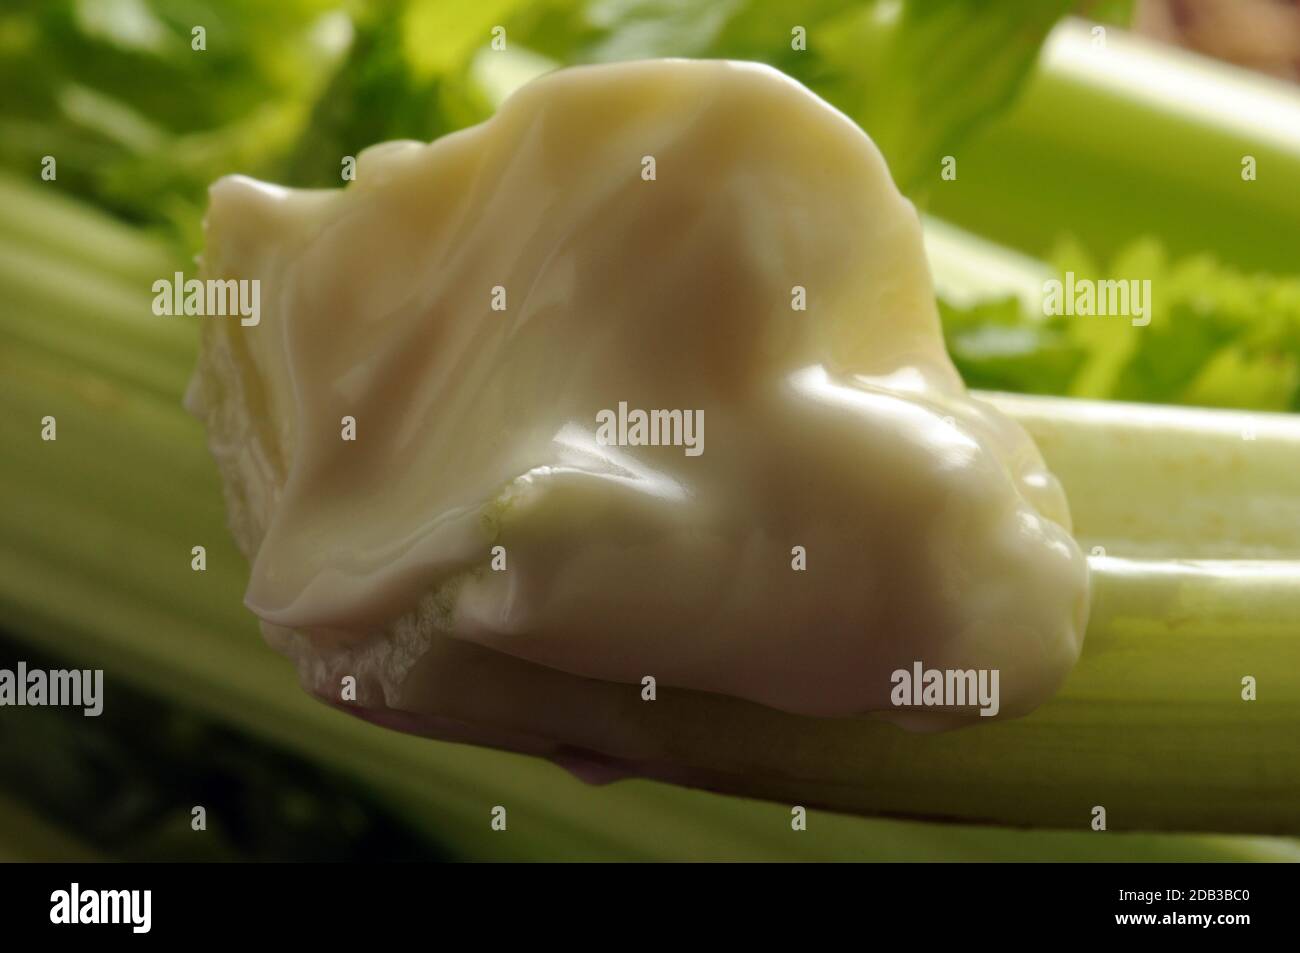 Close up on celery stick with mayonnaise Stock Photo